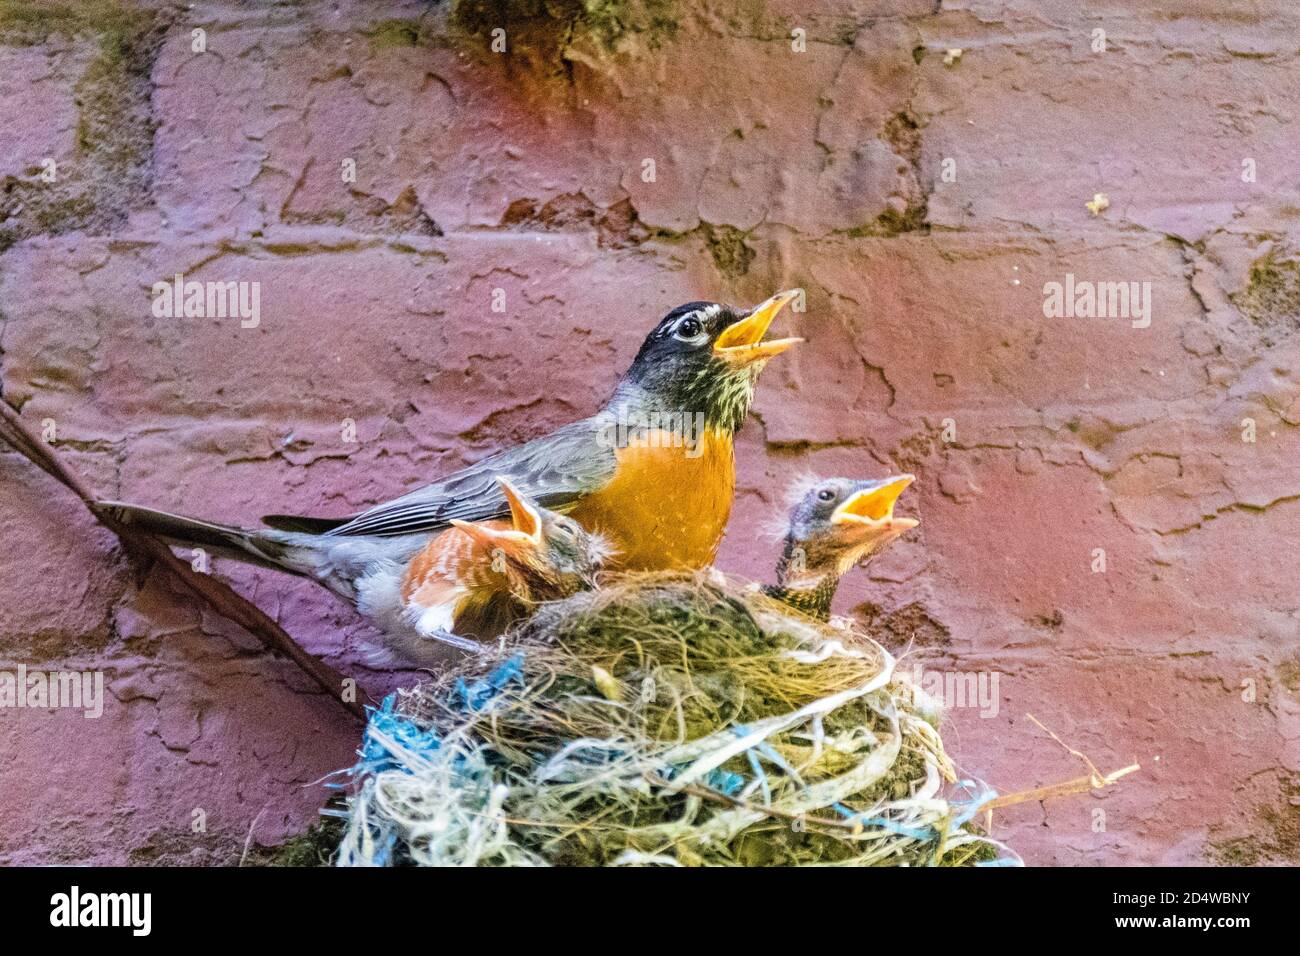 Adult American Robin, Turdus migratorius, with two chicks in nest, appearing to sing with beaks open, New York City, USA Stock Photo